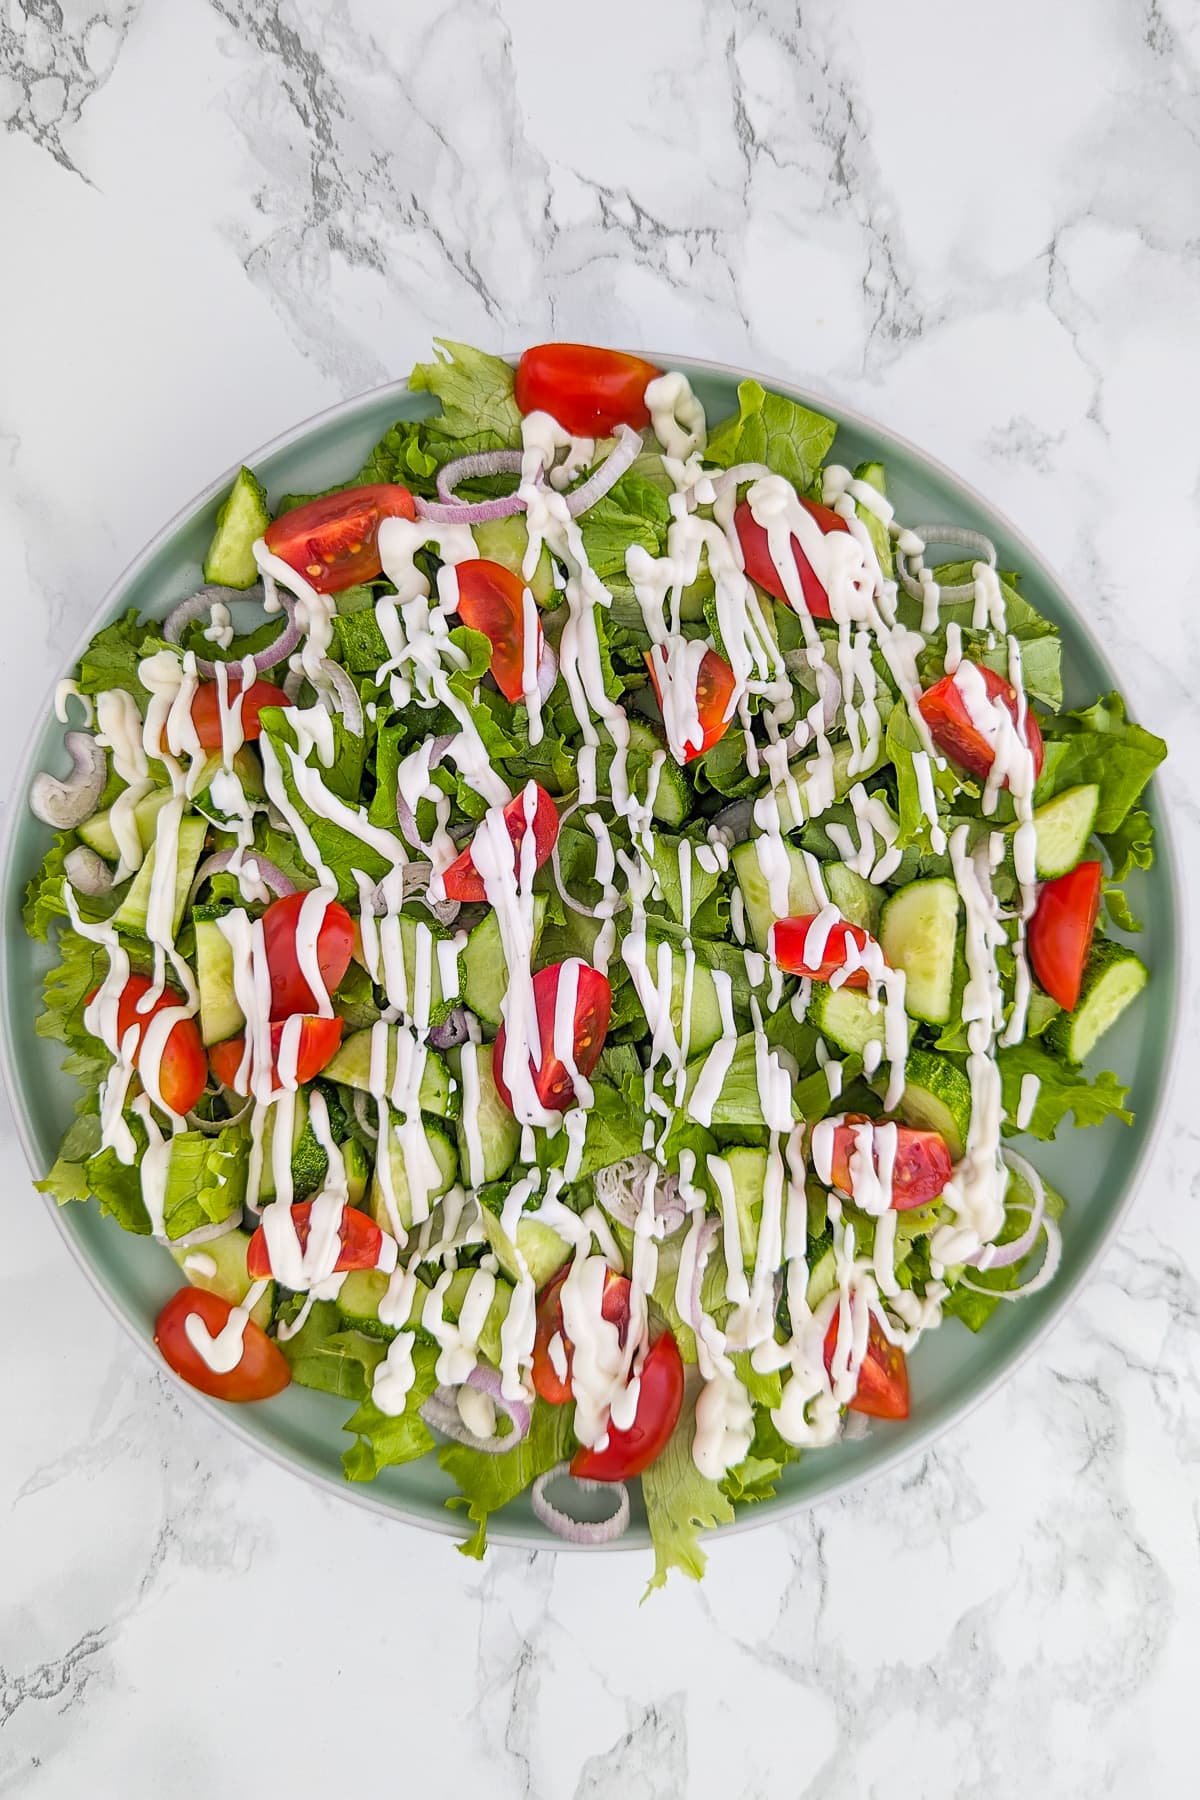 A green salad with cucumbers, salad leaves and tomatoes topped with a mix of yogurt and mayo.